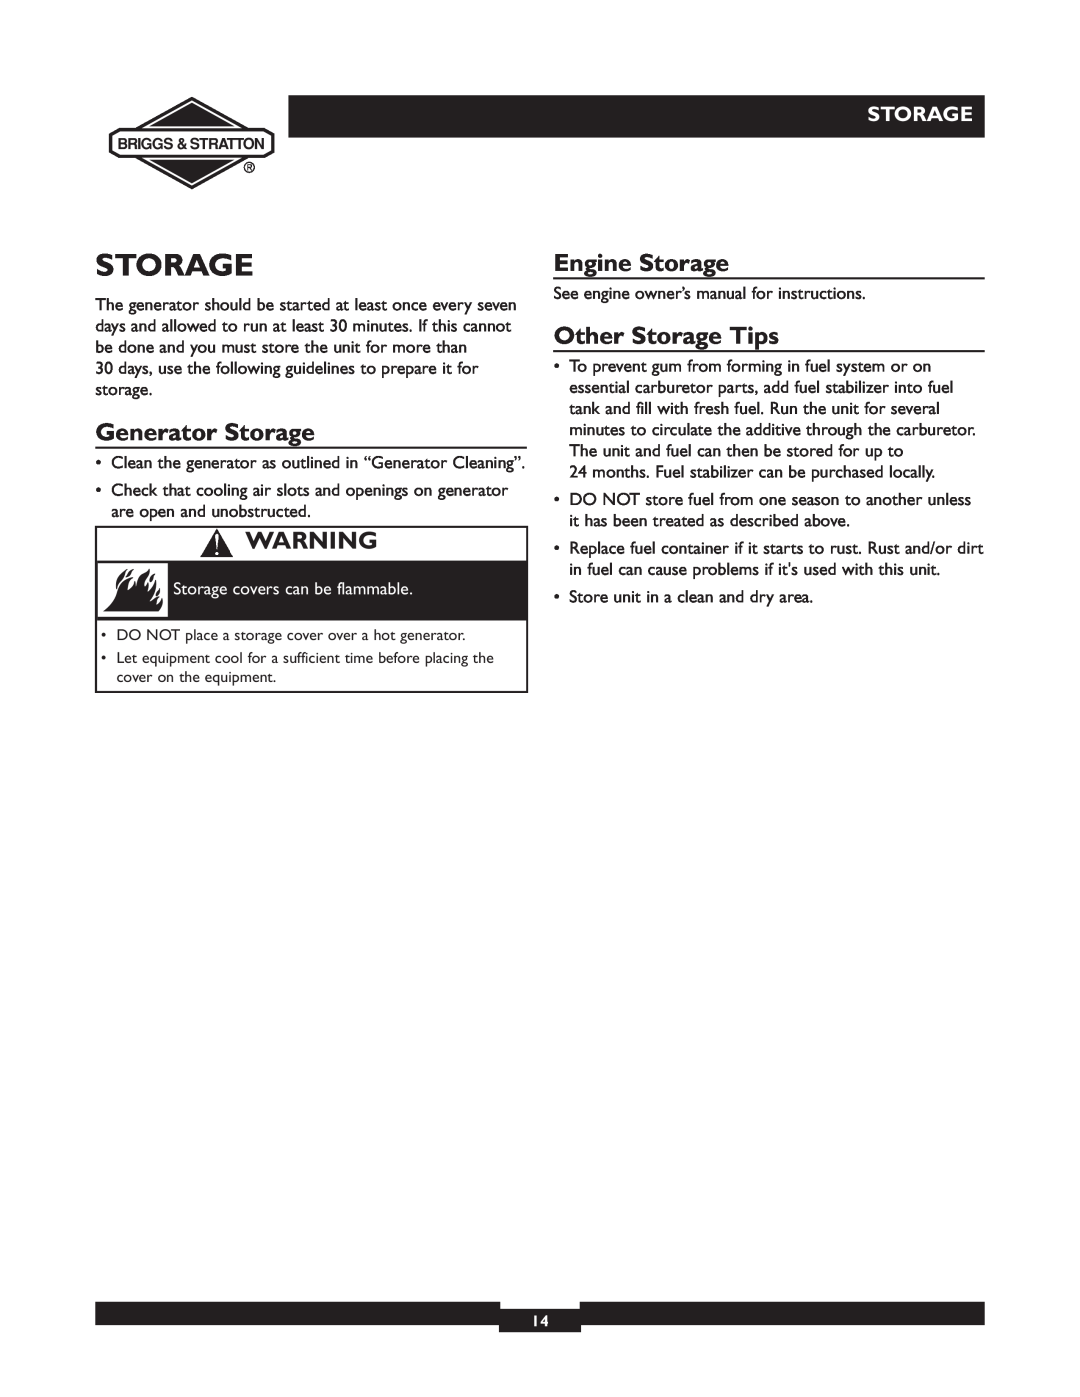 Briggs & Stratton 01532-4 Generator Storage, Engine Storage, Other Storage Tips, Storage covers can be flammable 